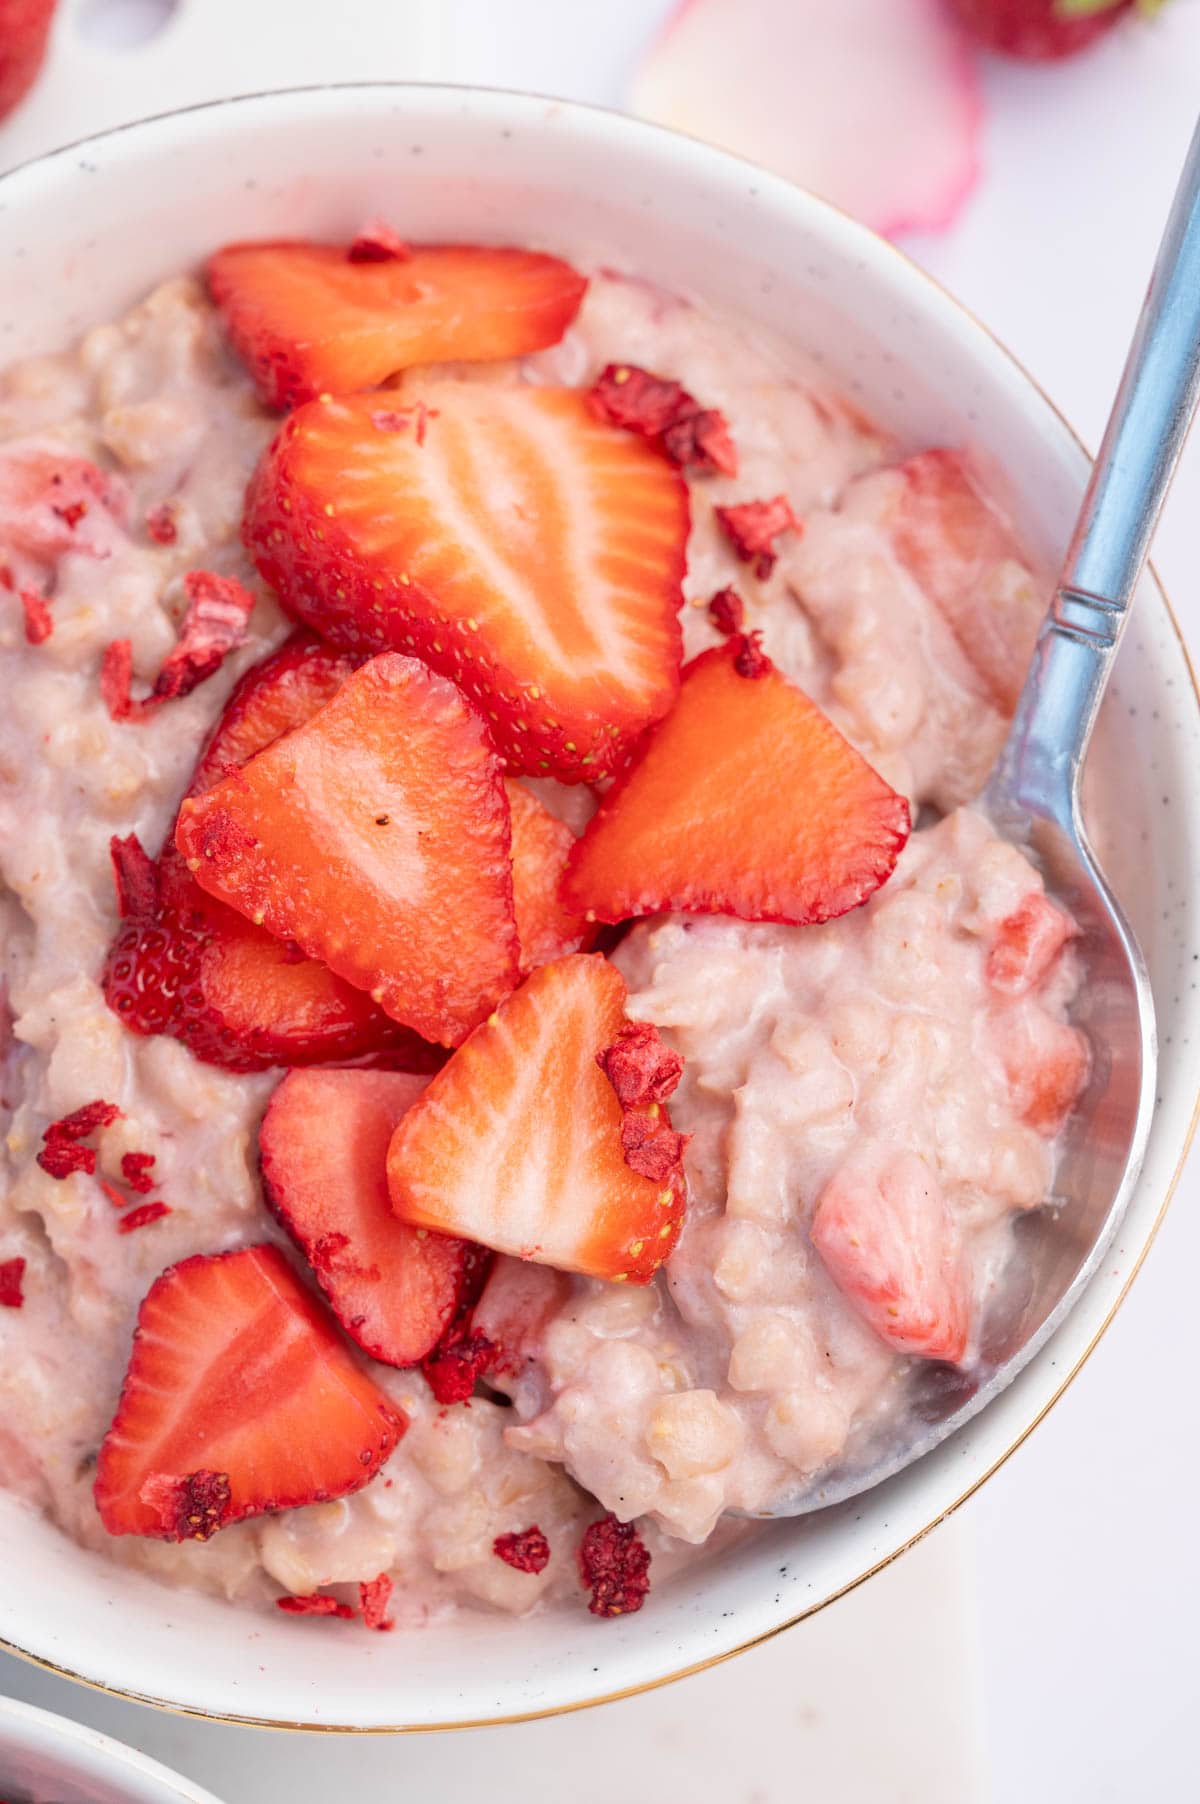 A close up photo of strawberries and cream oatmeal in a white bowl.